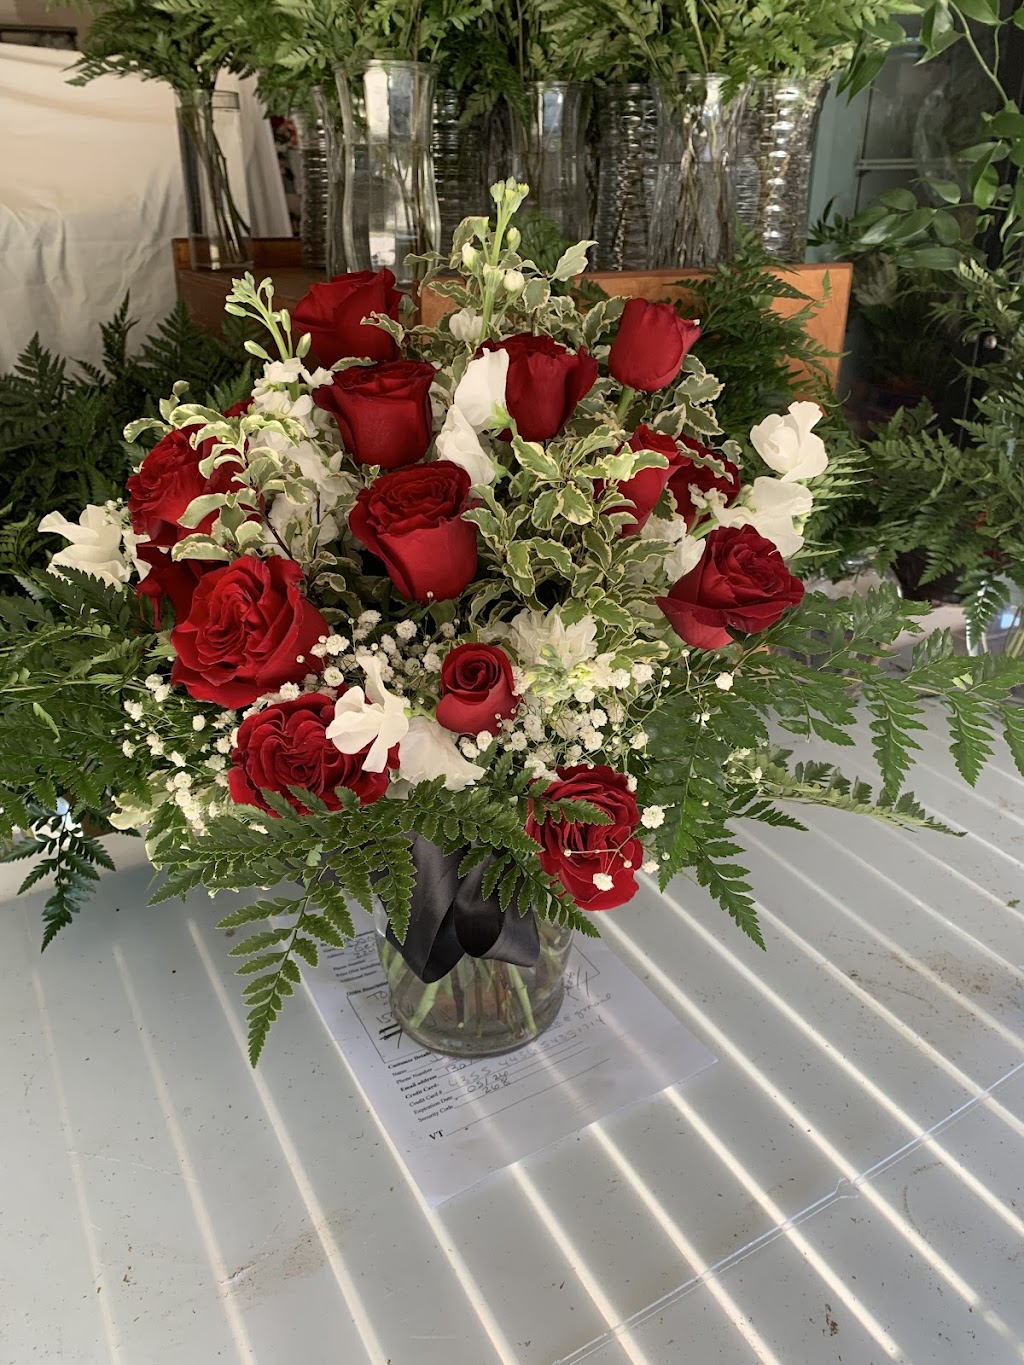 Cheryls Flowers and Gifts | 2015 Canyon Echo Dr, Franklin, TN 37064 | Phone: (615) 491-4710